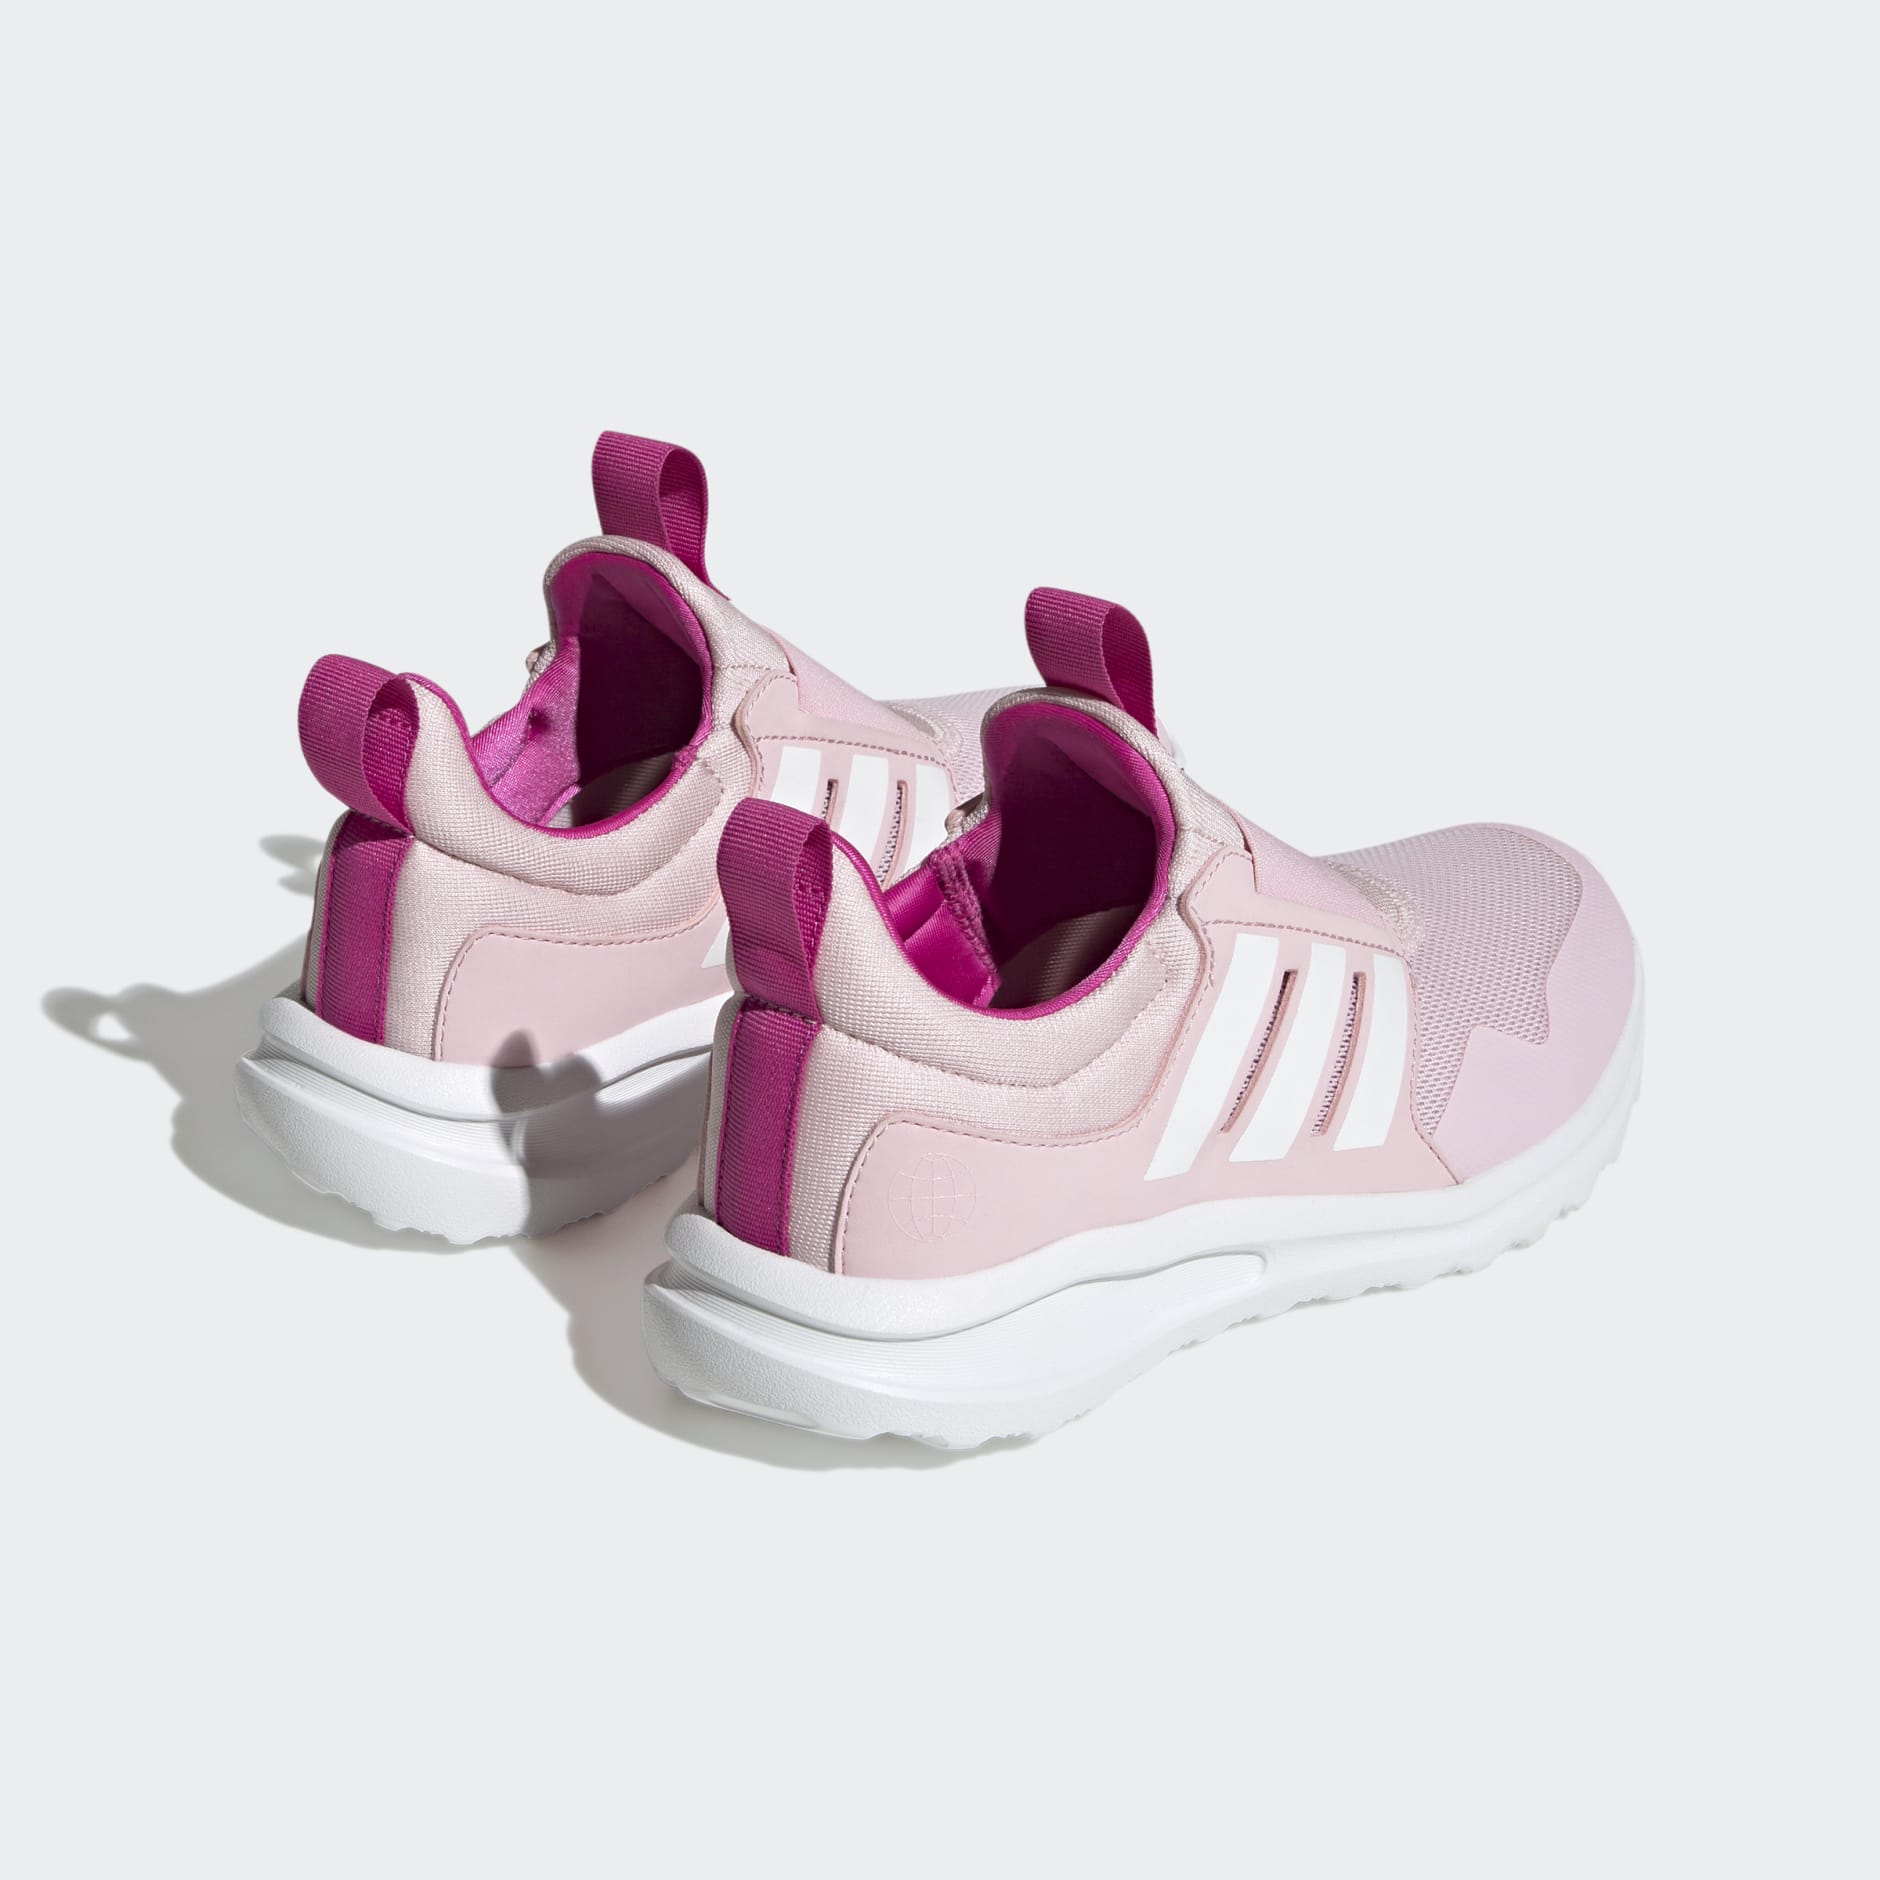 Kids Shoes - Activeride 2.0 Sport Running Slip-On Shoes - Pink | adidas ...